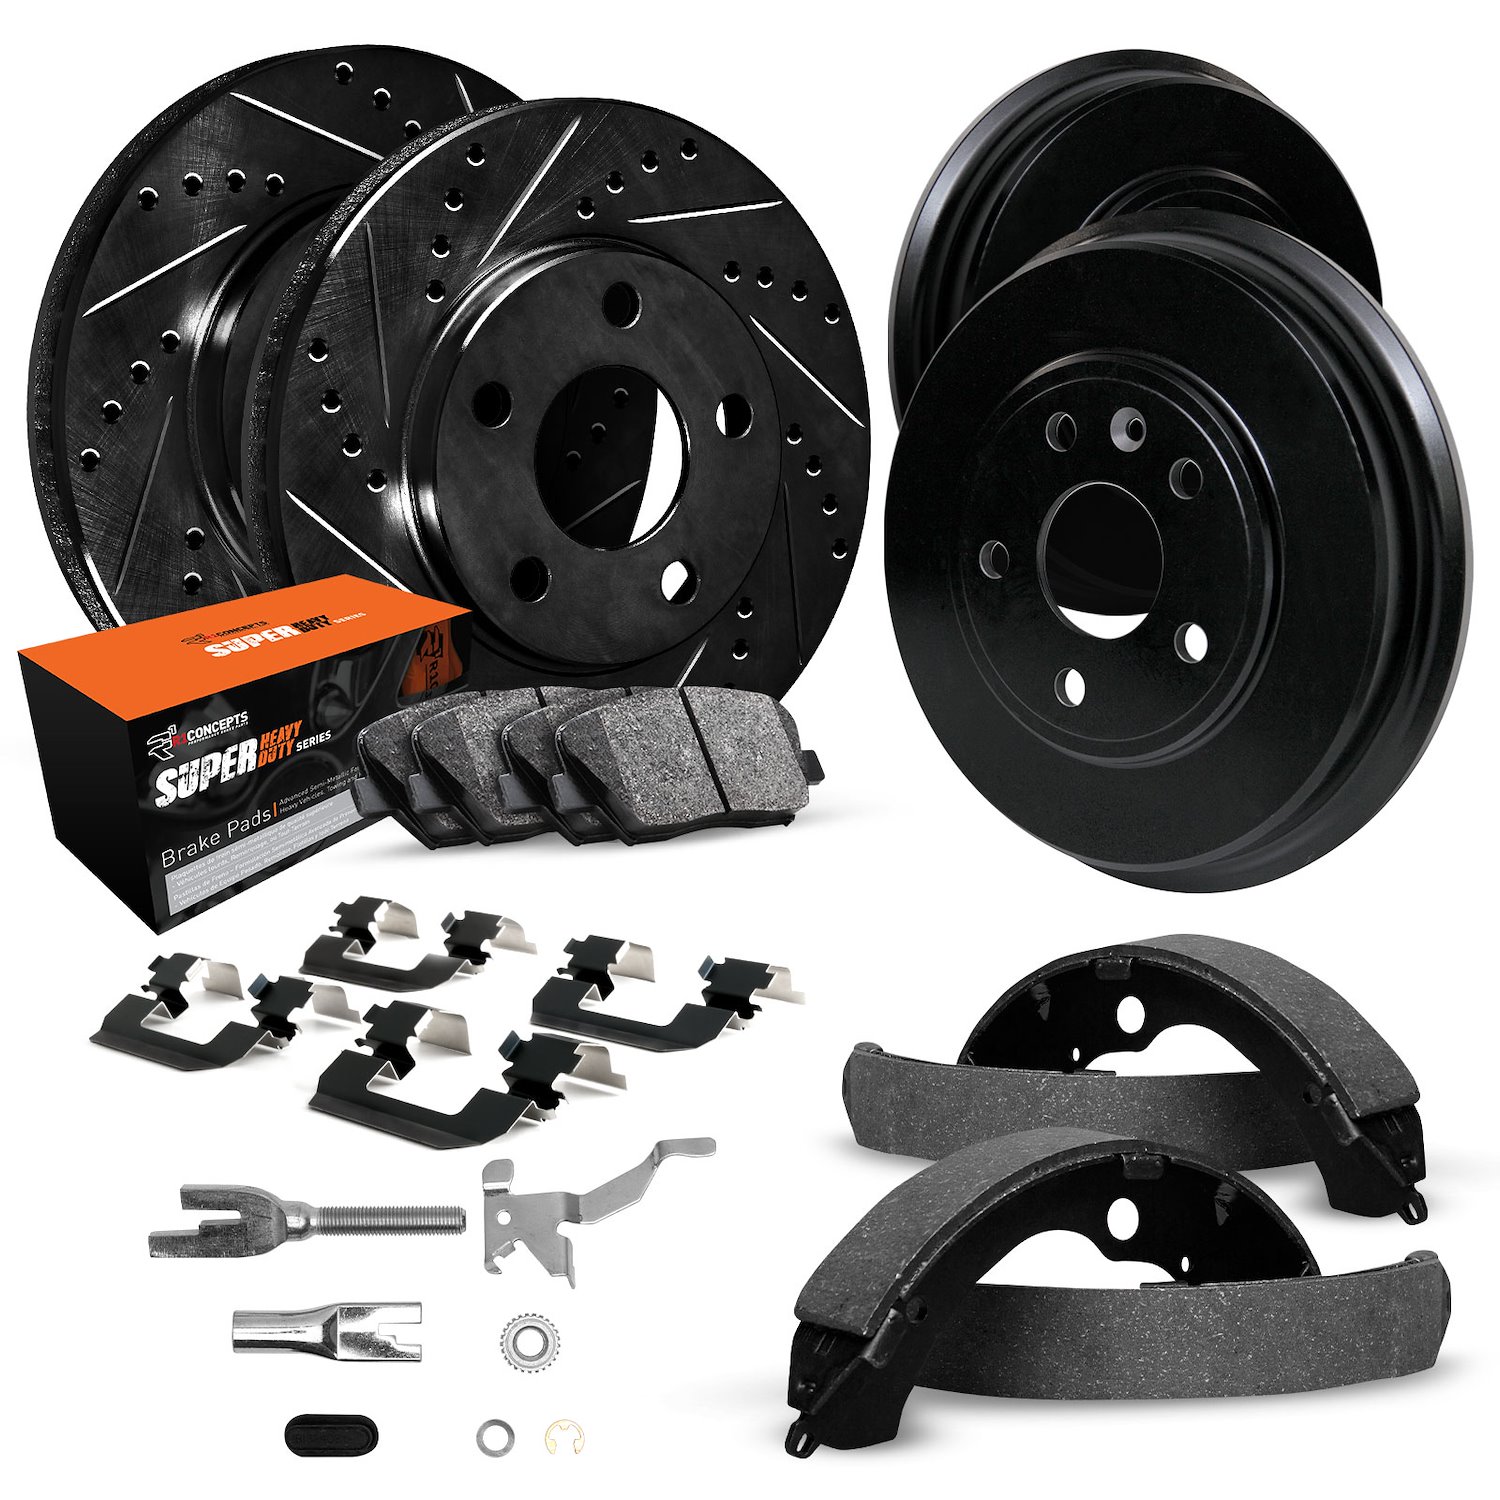 E-Line Drilled/Slotted Black Rotor & Drum Set w/Super-Duty Pads, Shoes, Hardware/Adjusters, 1971-1978 GM